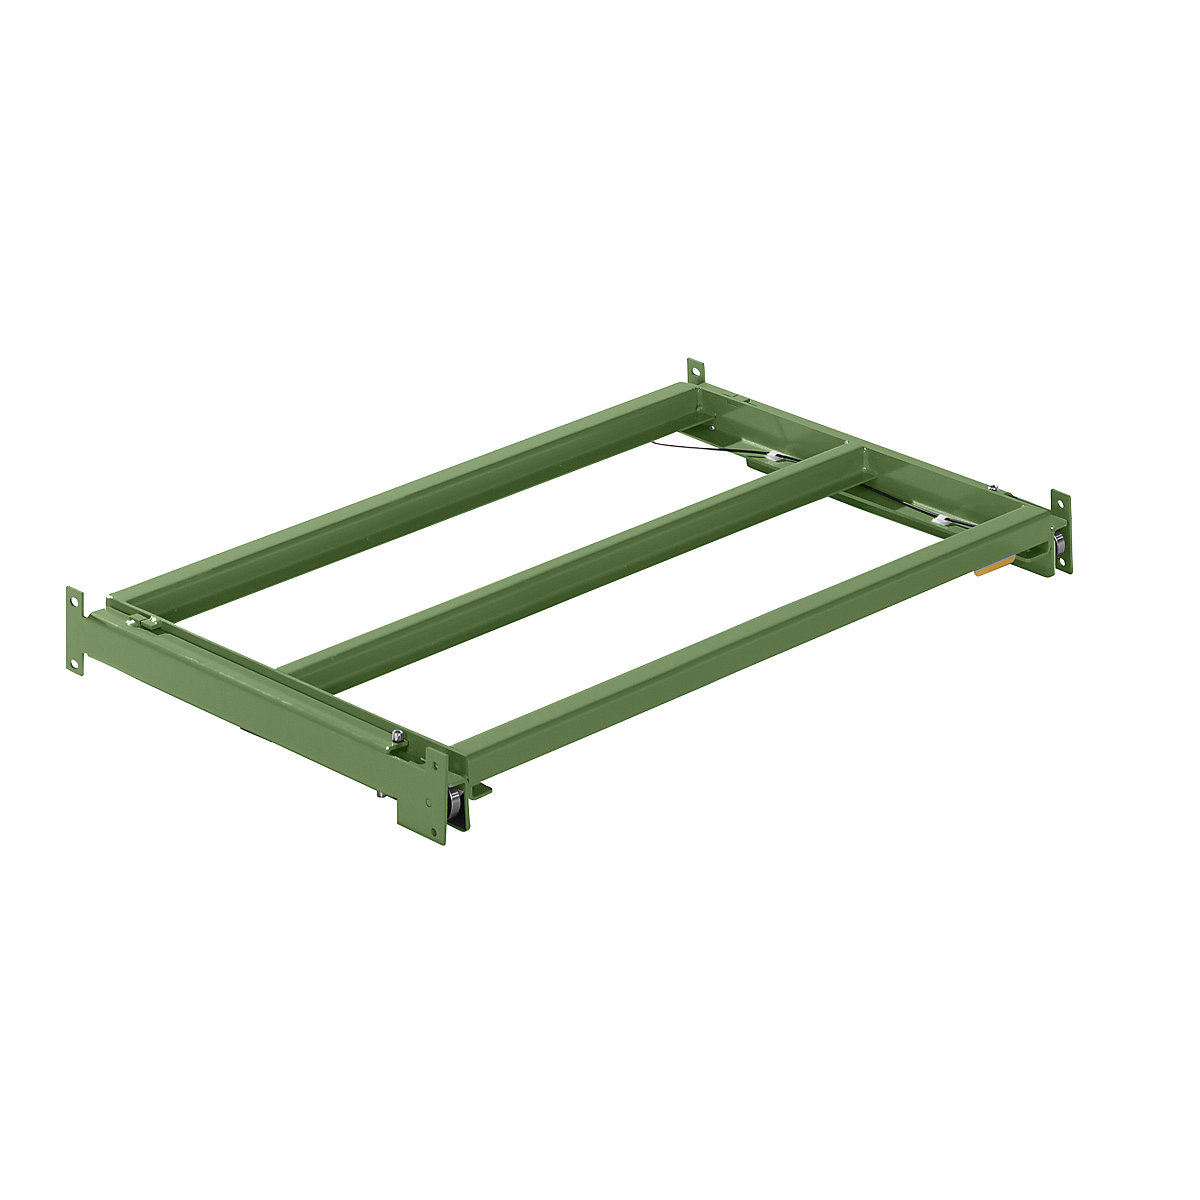 Extension frame – LISTA, WxD 1290 x 860 mm, max. shelf load 1000 kg, 65 % extendable, reseda green-5